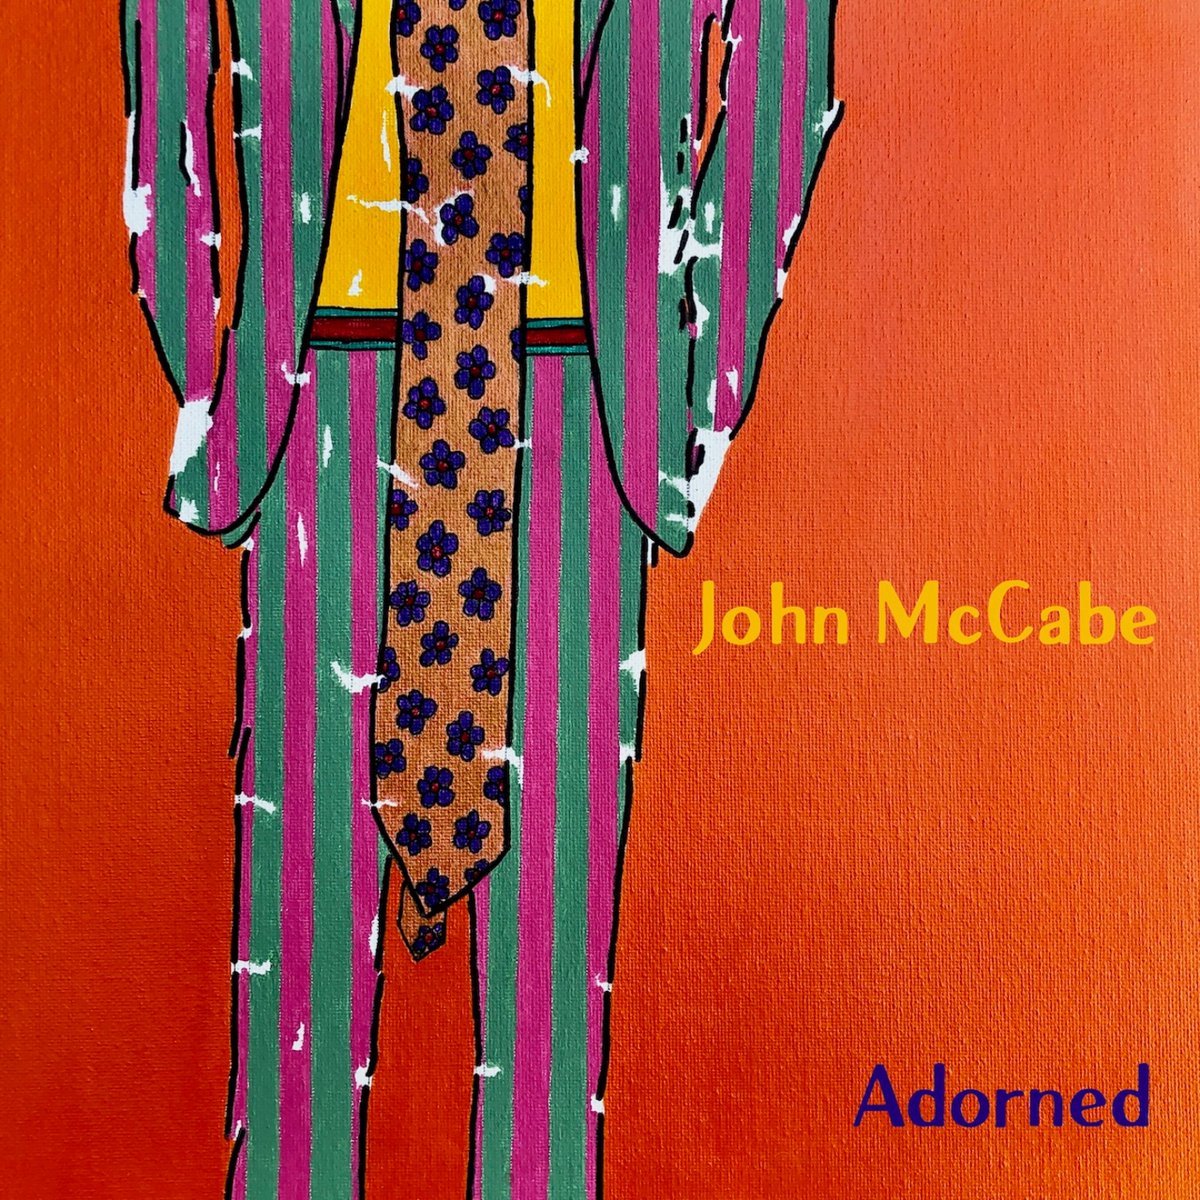 Our @subjangle label have release the wonderful 'Adorned' LP by @mccabejh65 !!! Grab yourself a limited edition CD using 'weekend20' before 15.11.23 to claim a 20% discount. johnmccabe.bandcamp.com/album/adorned